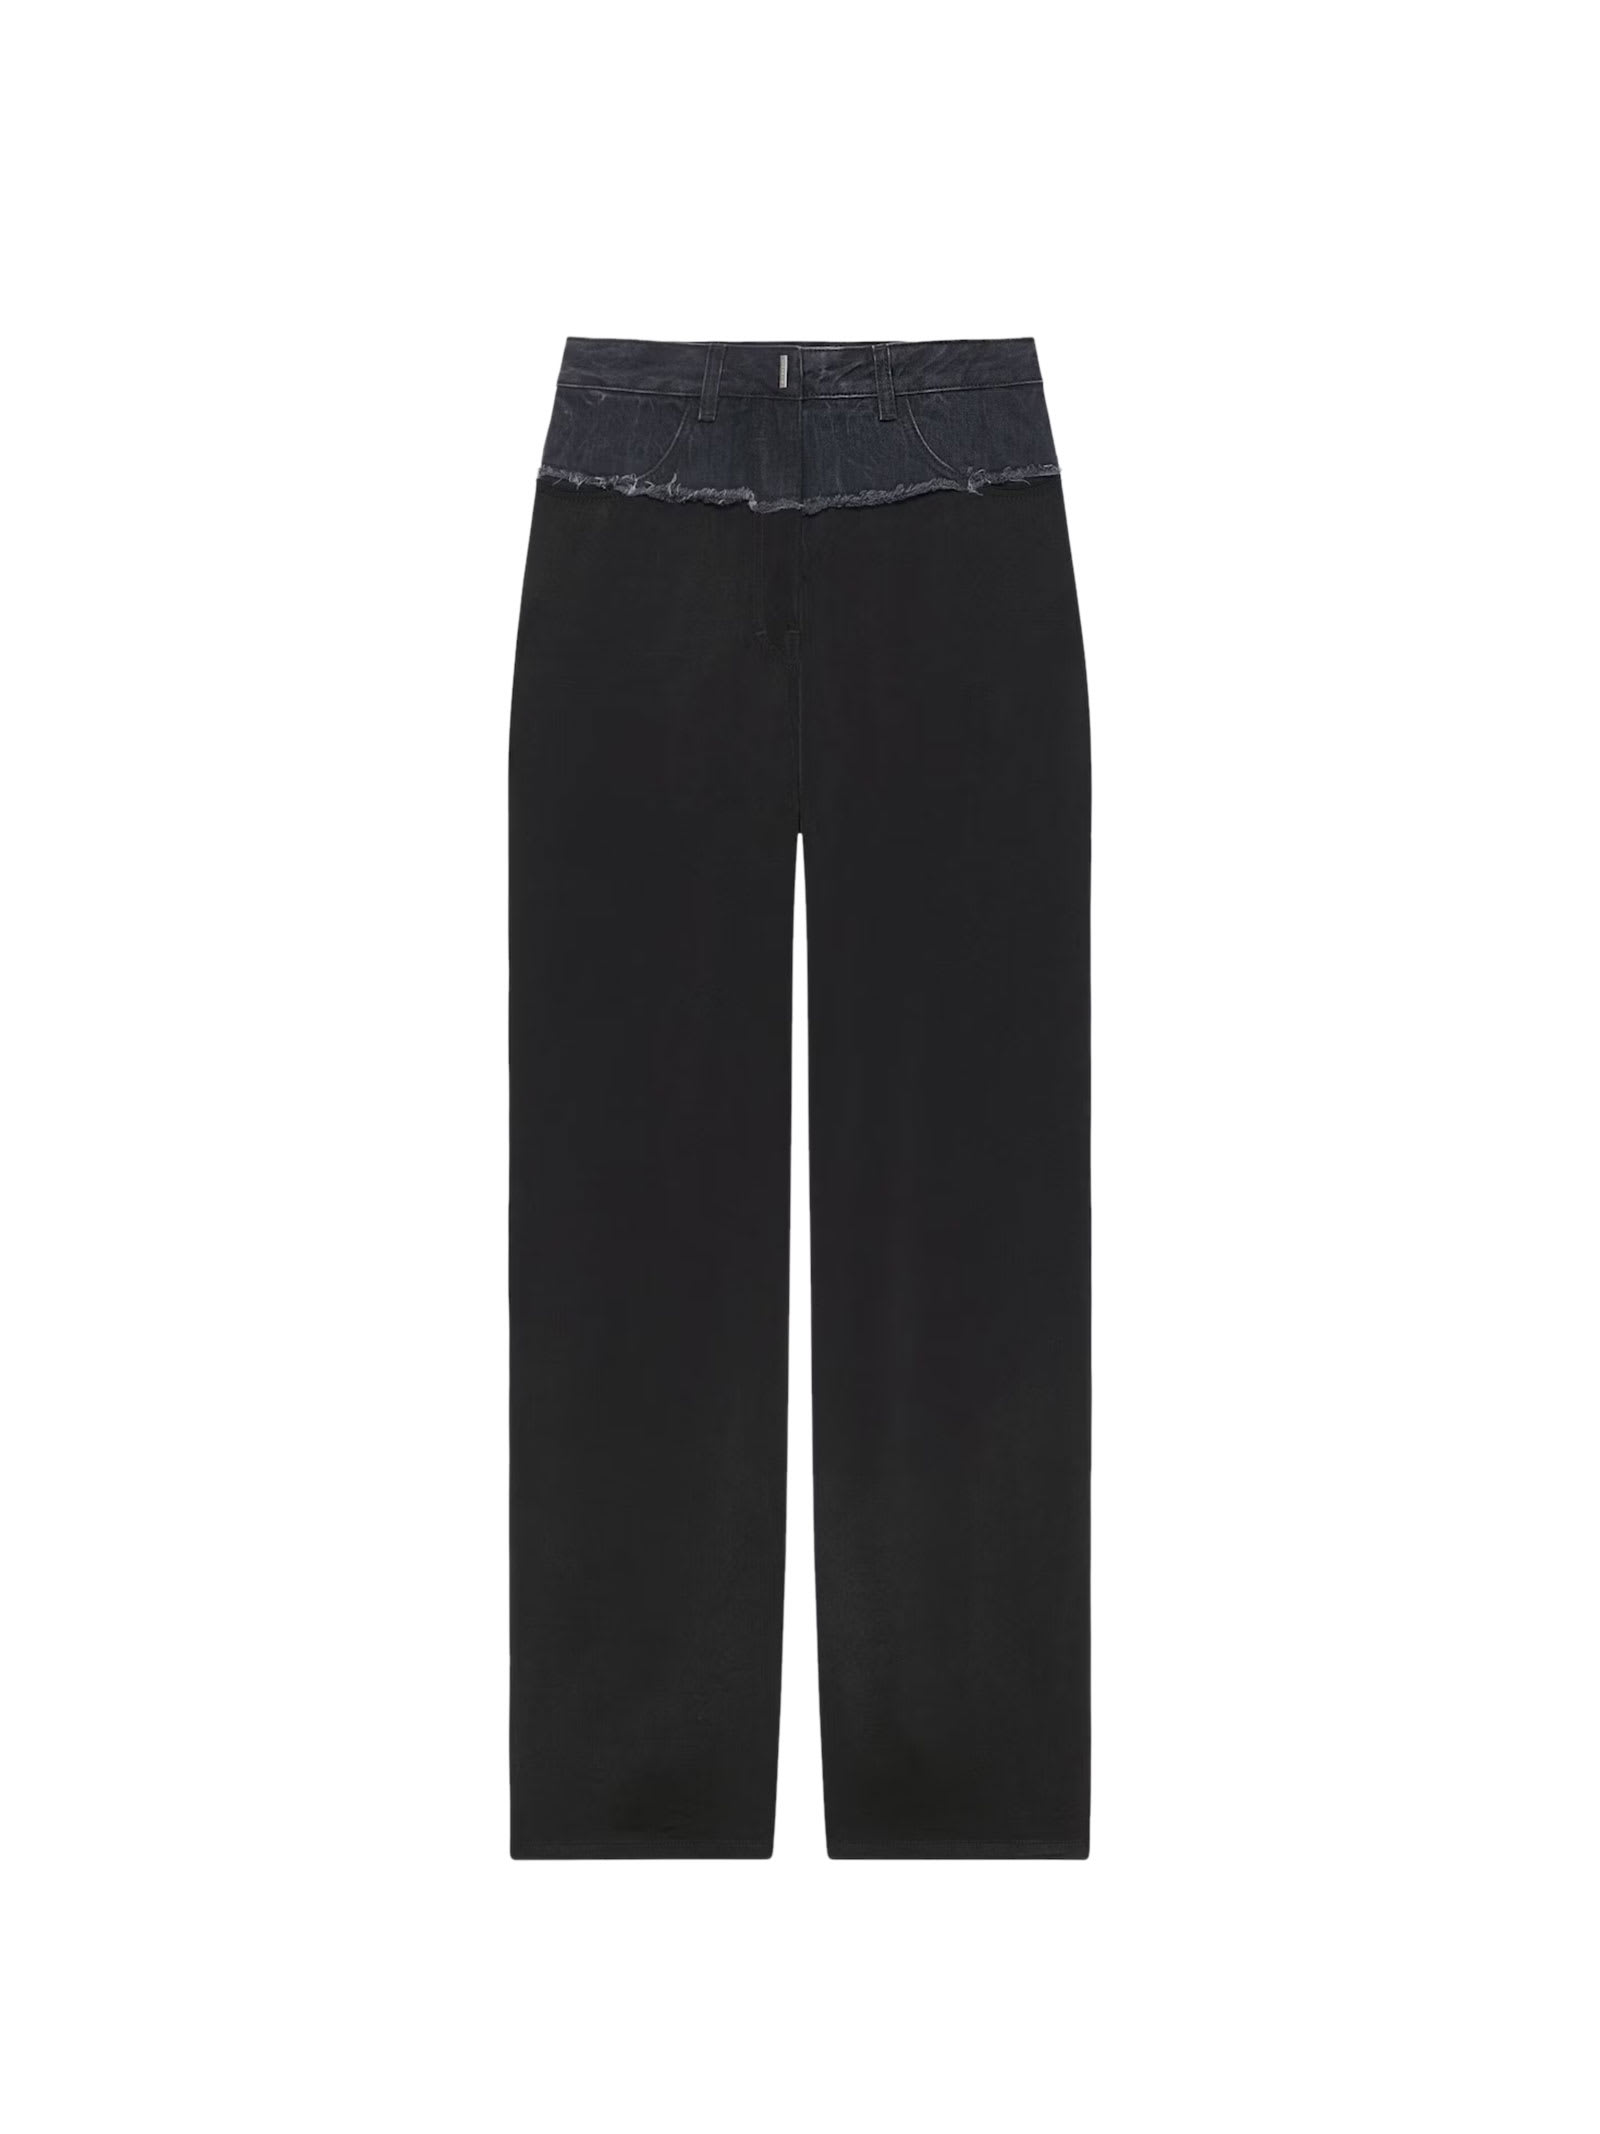 GIVENCHY HIGH-WAISTED JEANS IN MÉLANGE DENIM